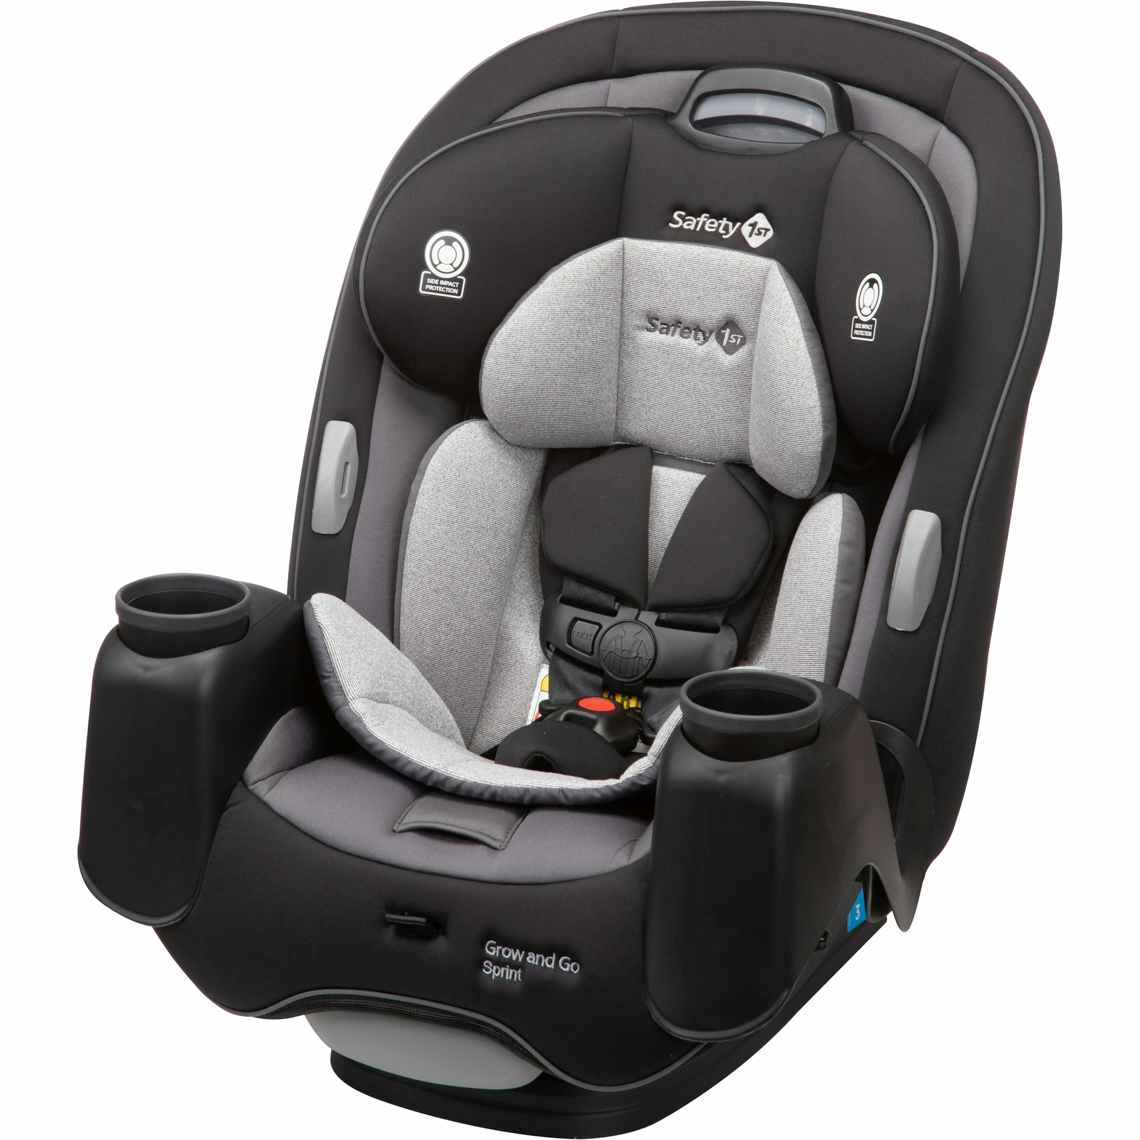 stock photo of safety first car seat on white background